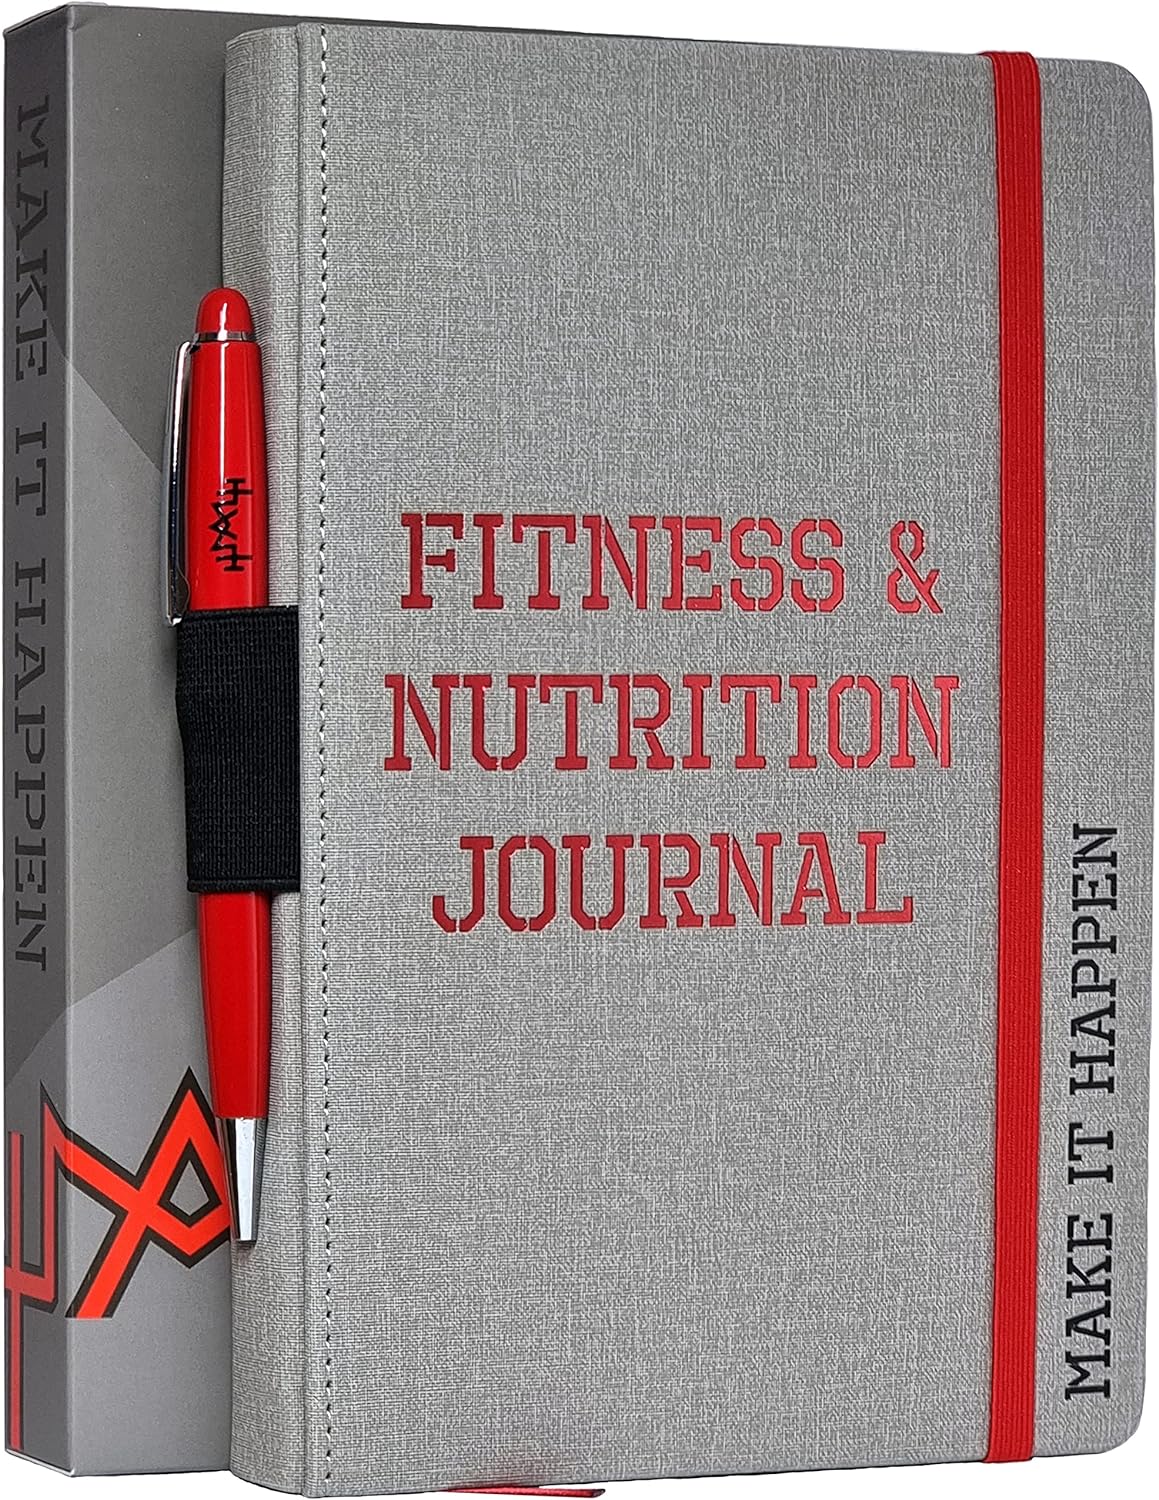 MaLetics – A5 Premium Fitness & Nutrition Journal Planner Daily Exercise Log Book For Men & Women – Set 13 Goals, Track 124 Workouts, Daily Calories, Measure Progress & Log 84 Personal Records